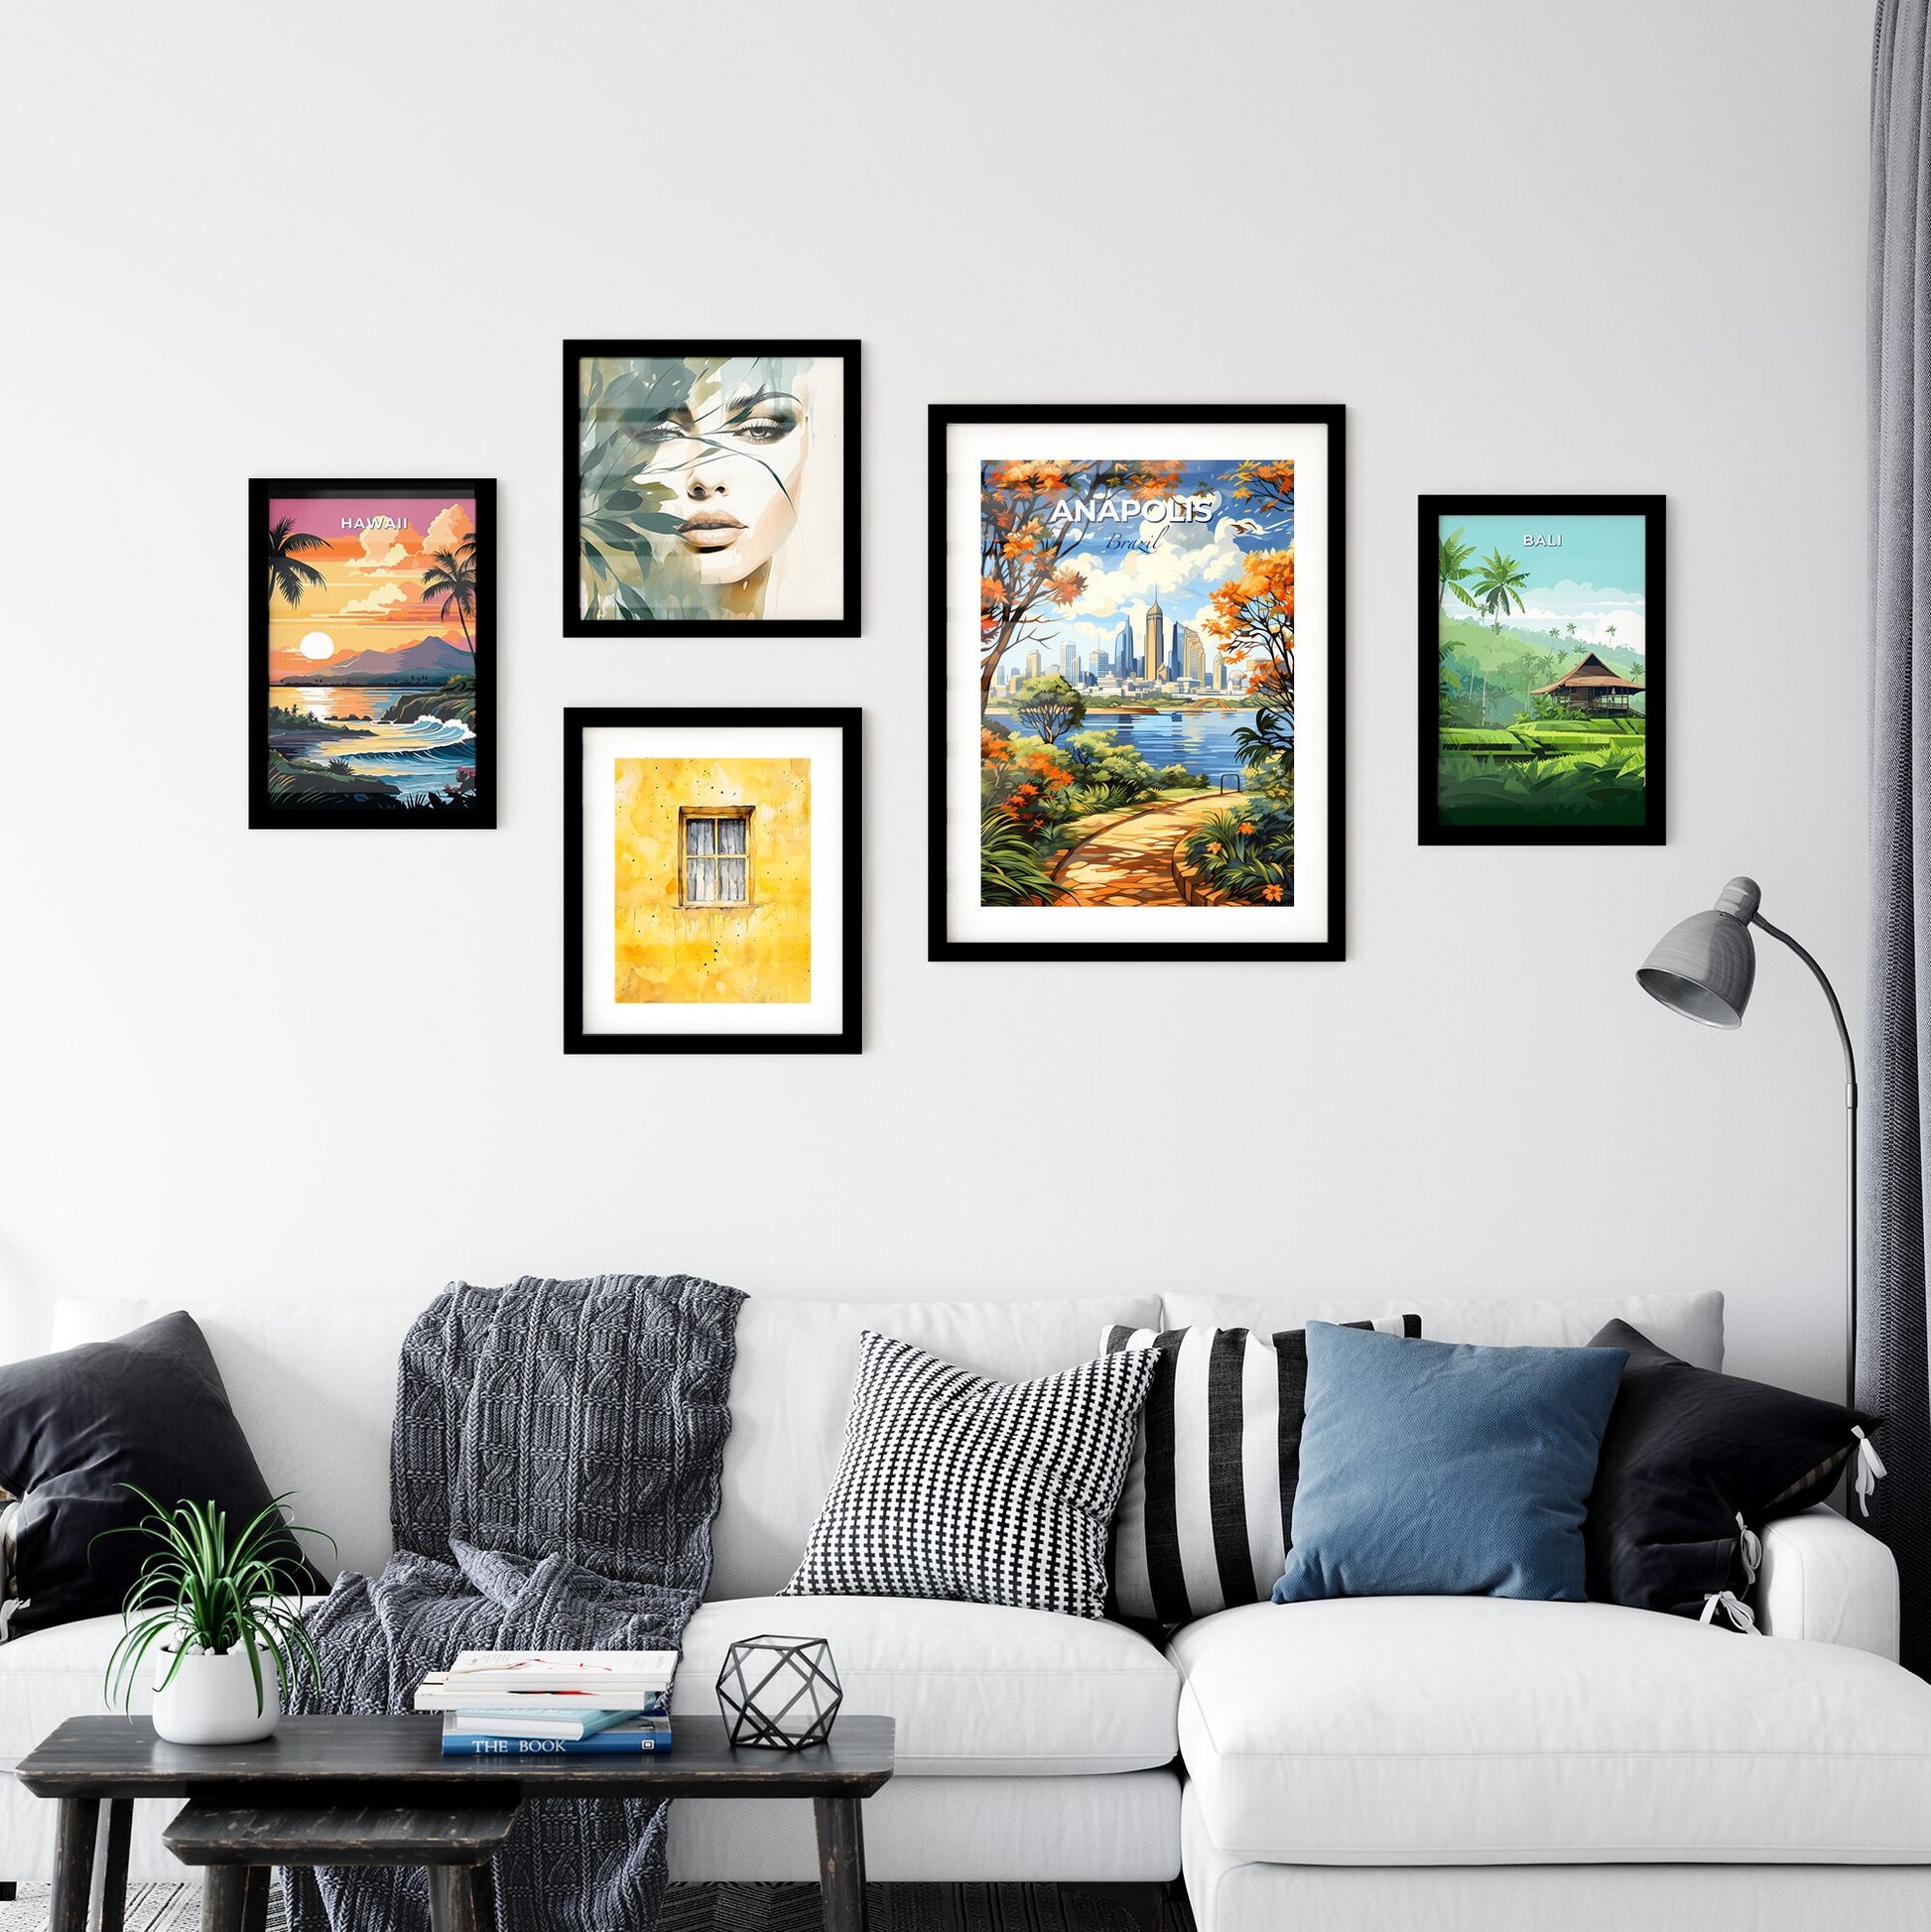 Vibrant Anapolis Brazil Skyline City Painting by the River Art Default Title